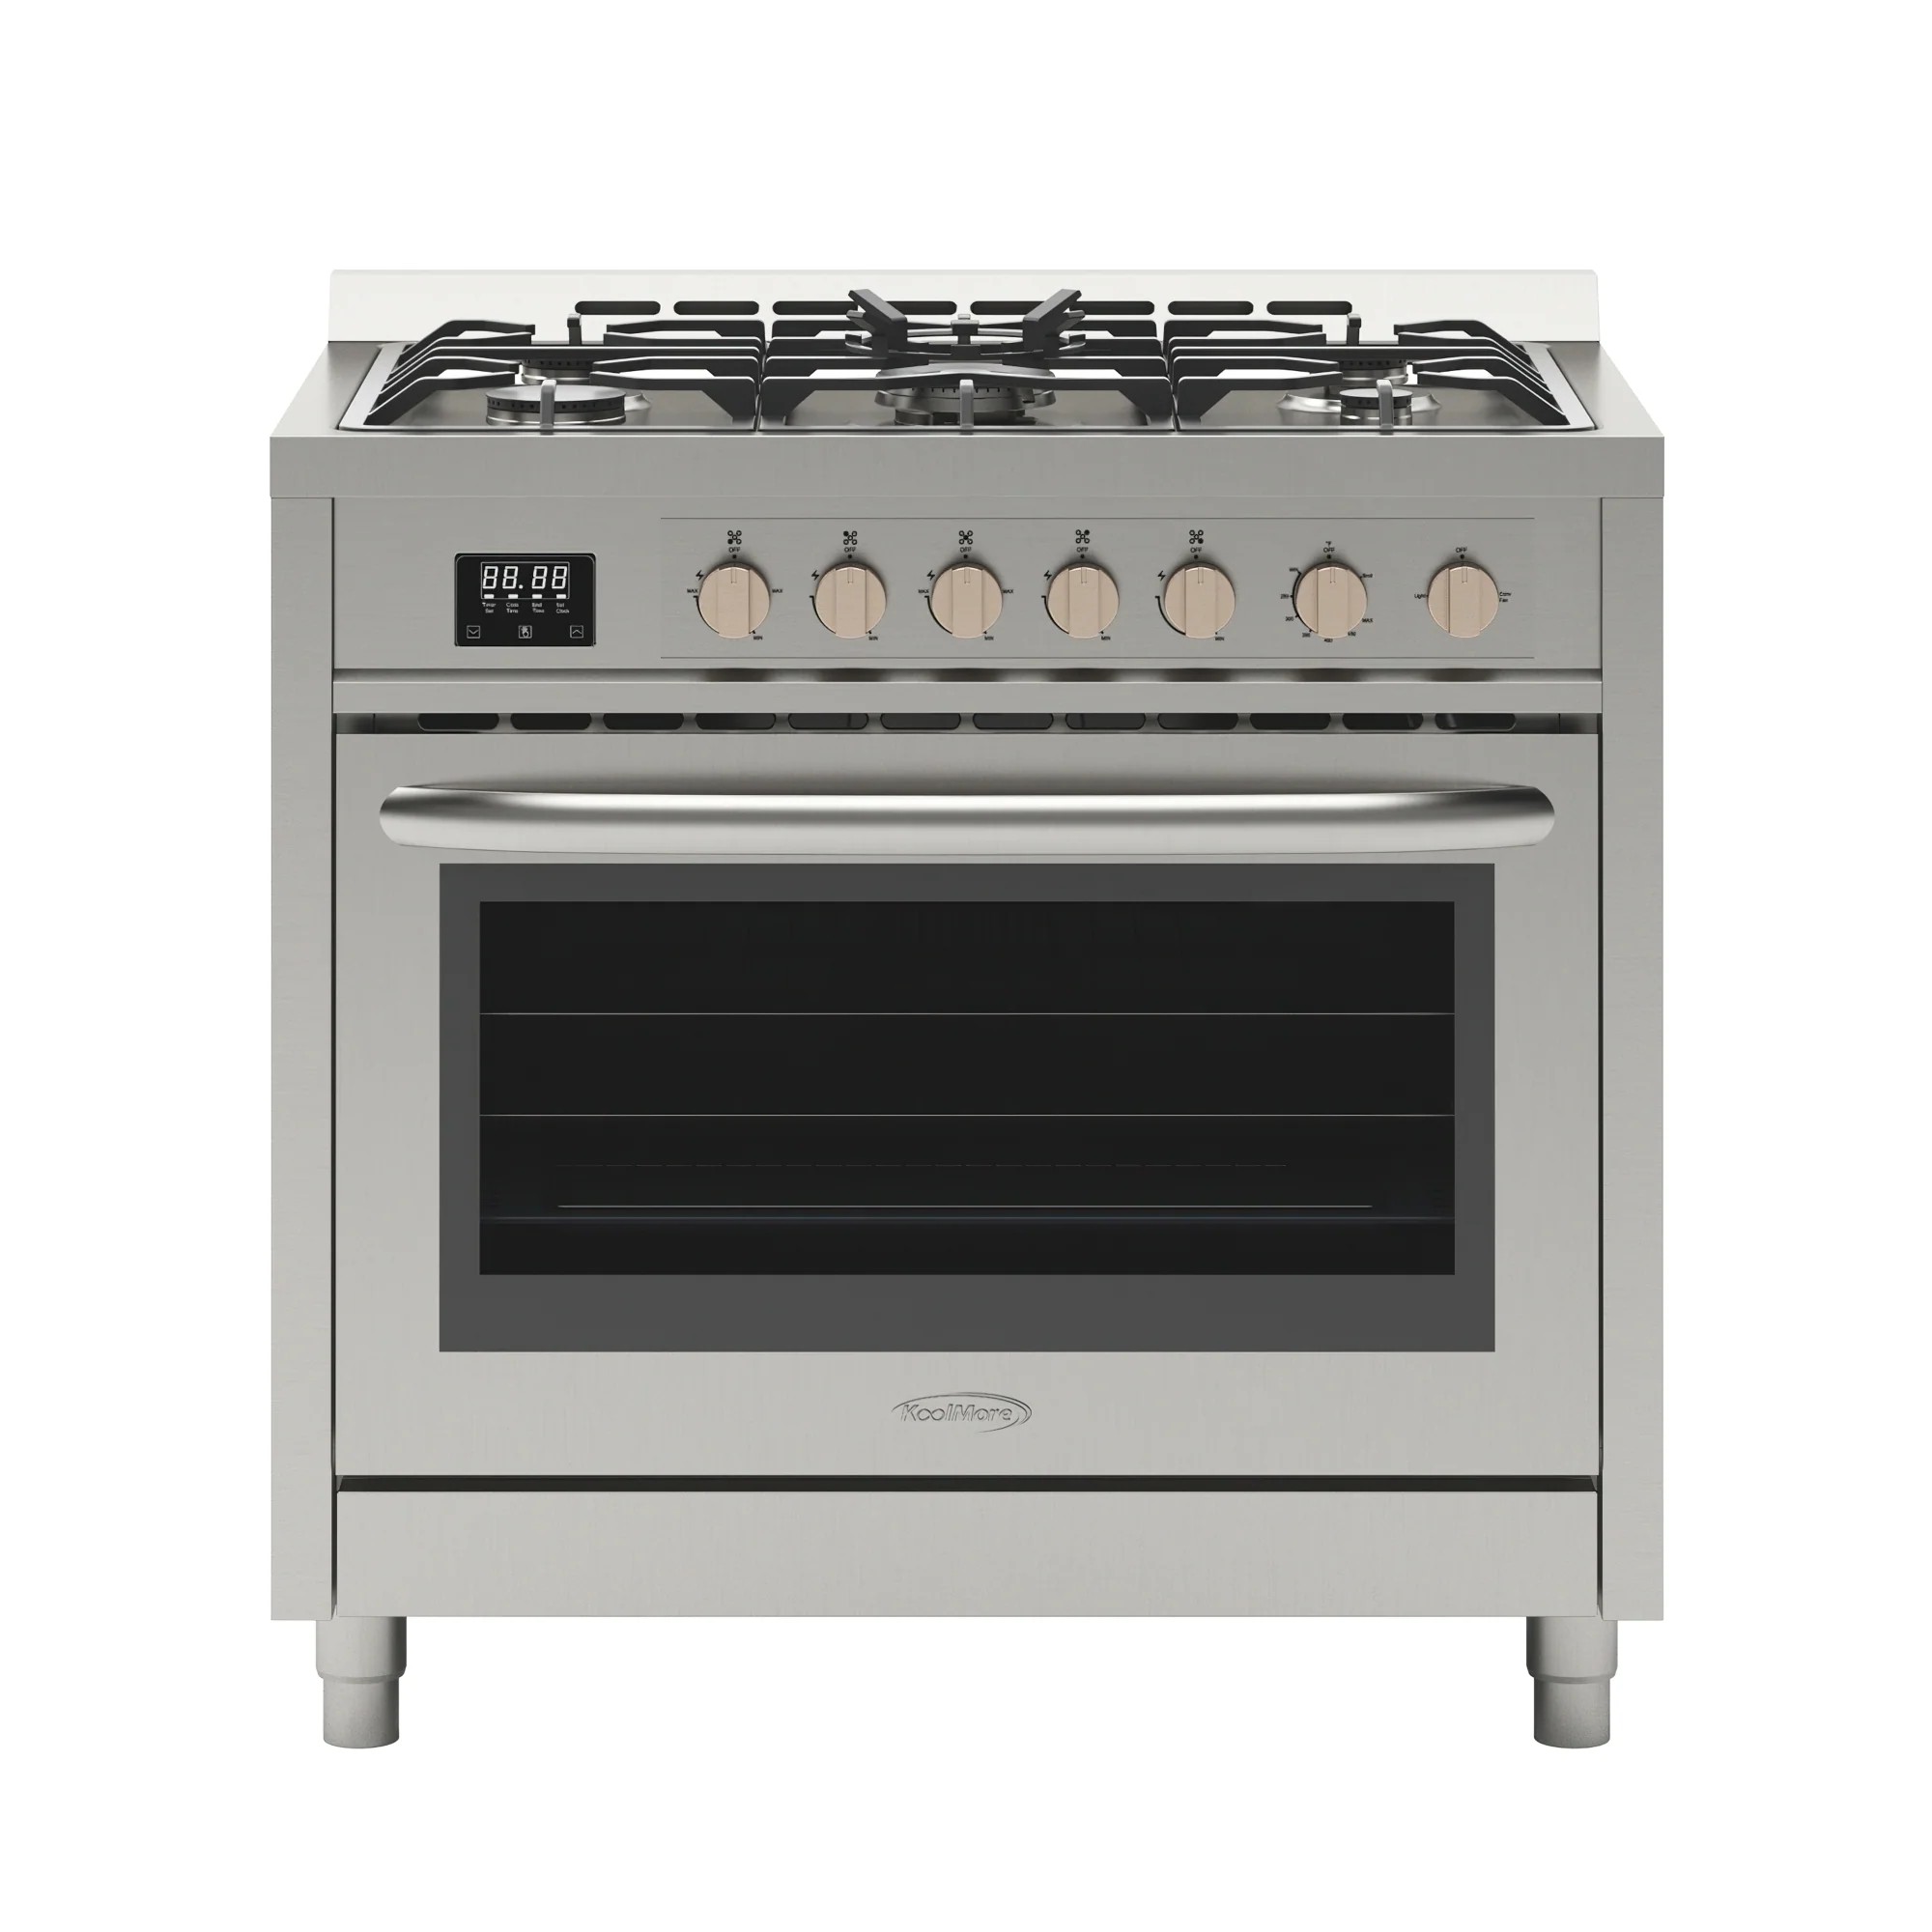 Koolmore KM-FR36GL-SS 36" Professional Gas Range with Convection Oven